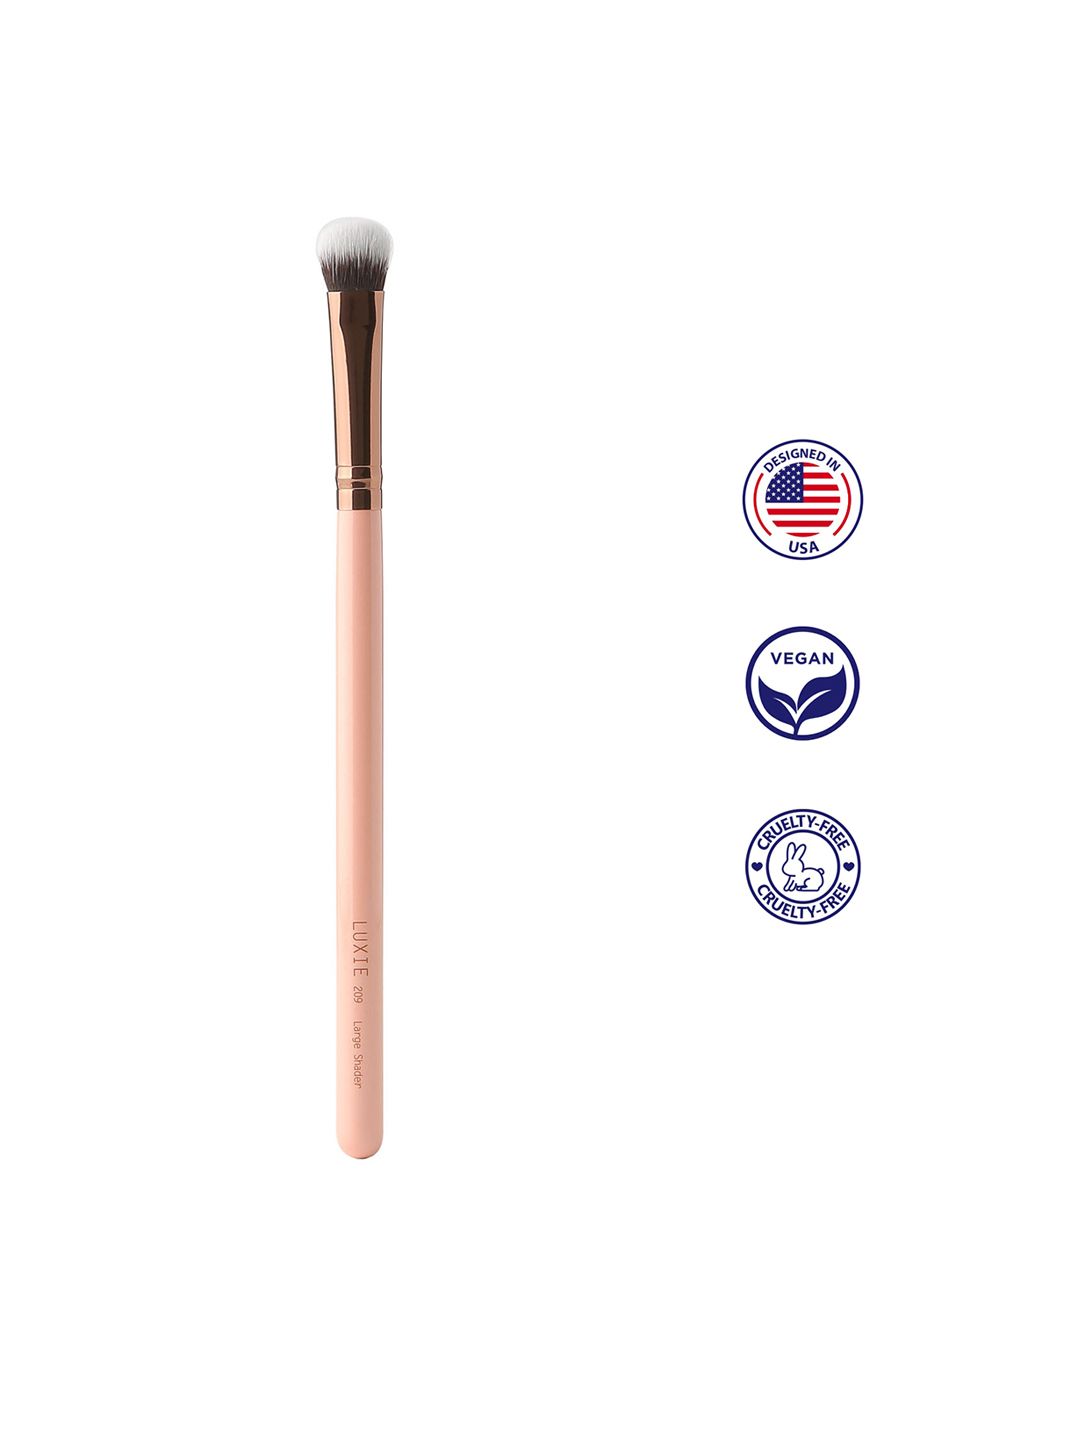 LUXIE Rose Gold Large Shader Brush - 209 Price in India